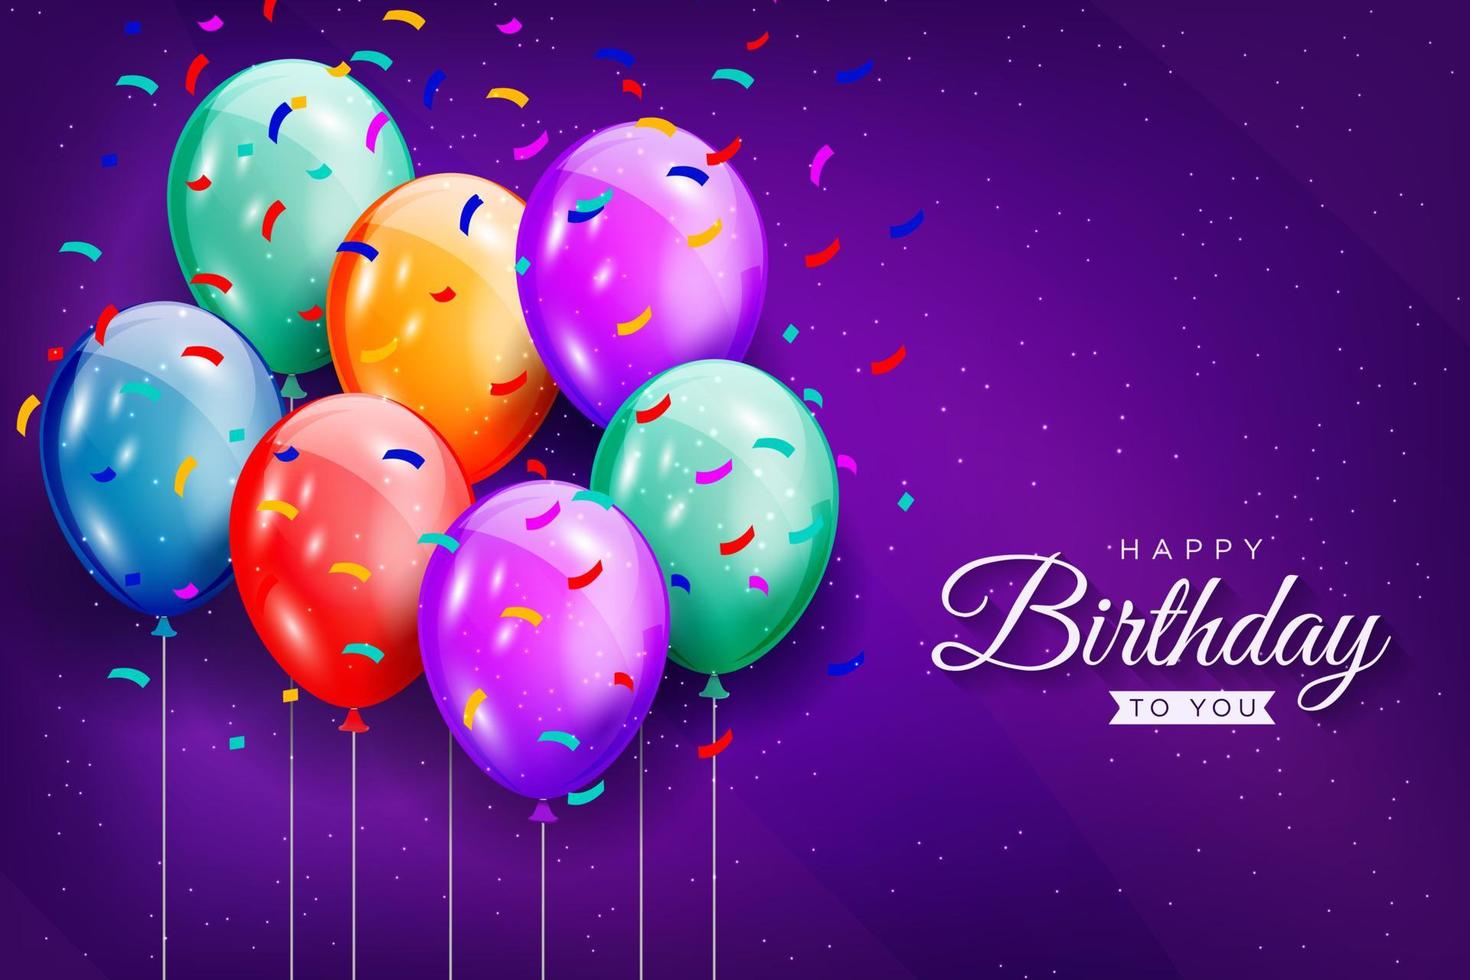 Happy birthday celebration background with realistic colorful ...